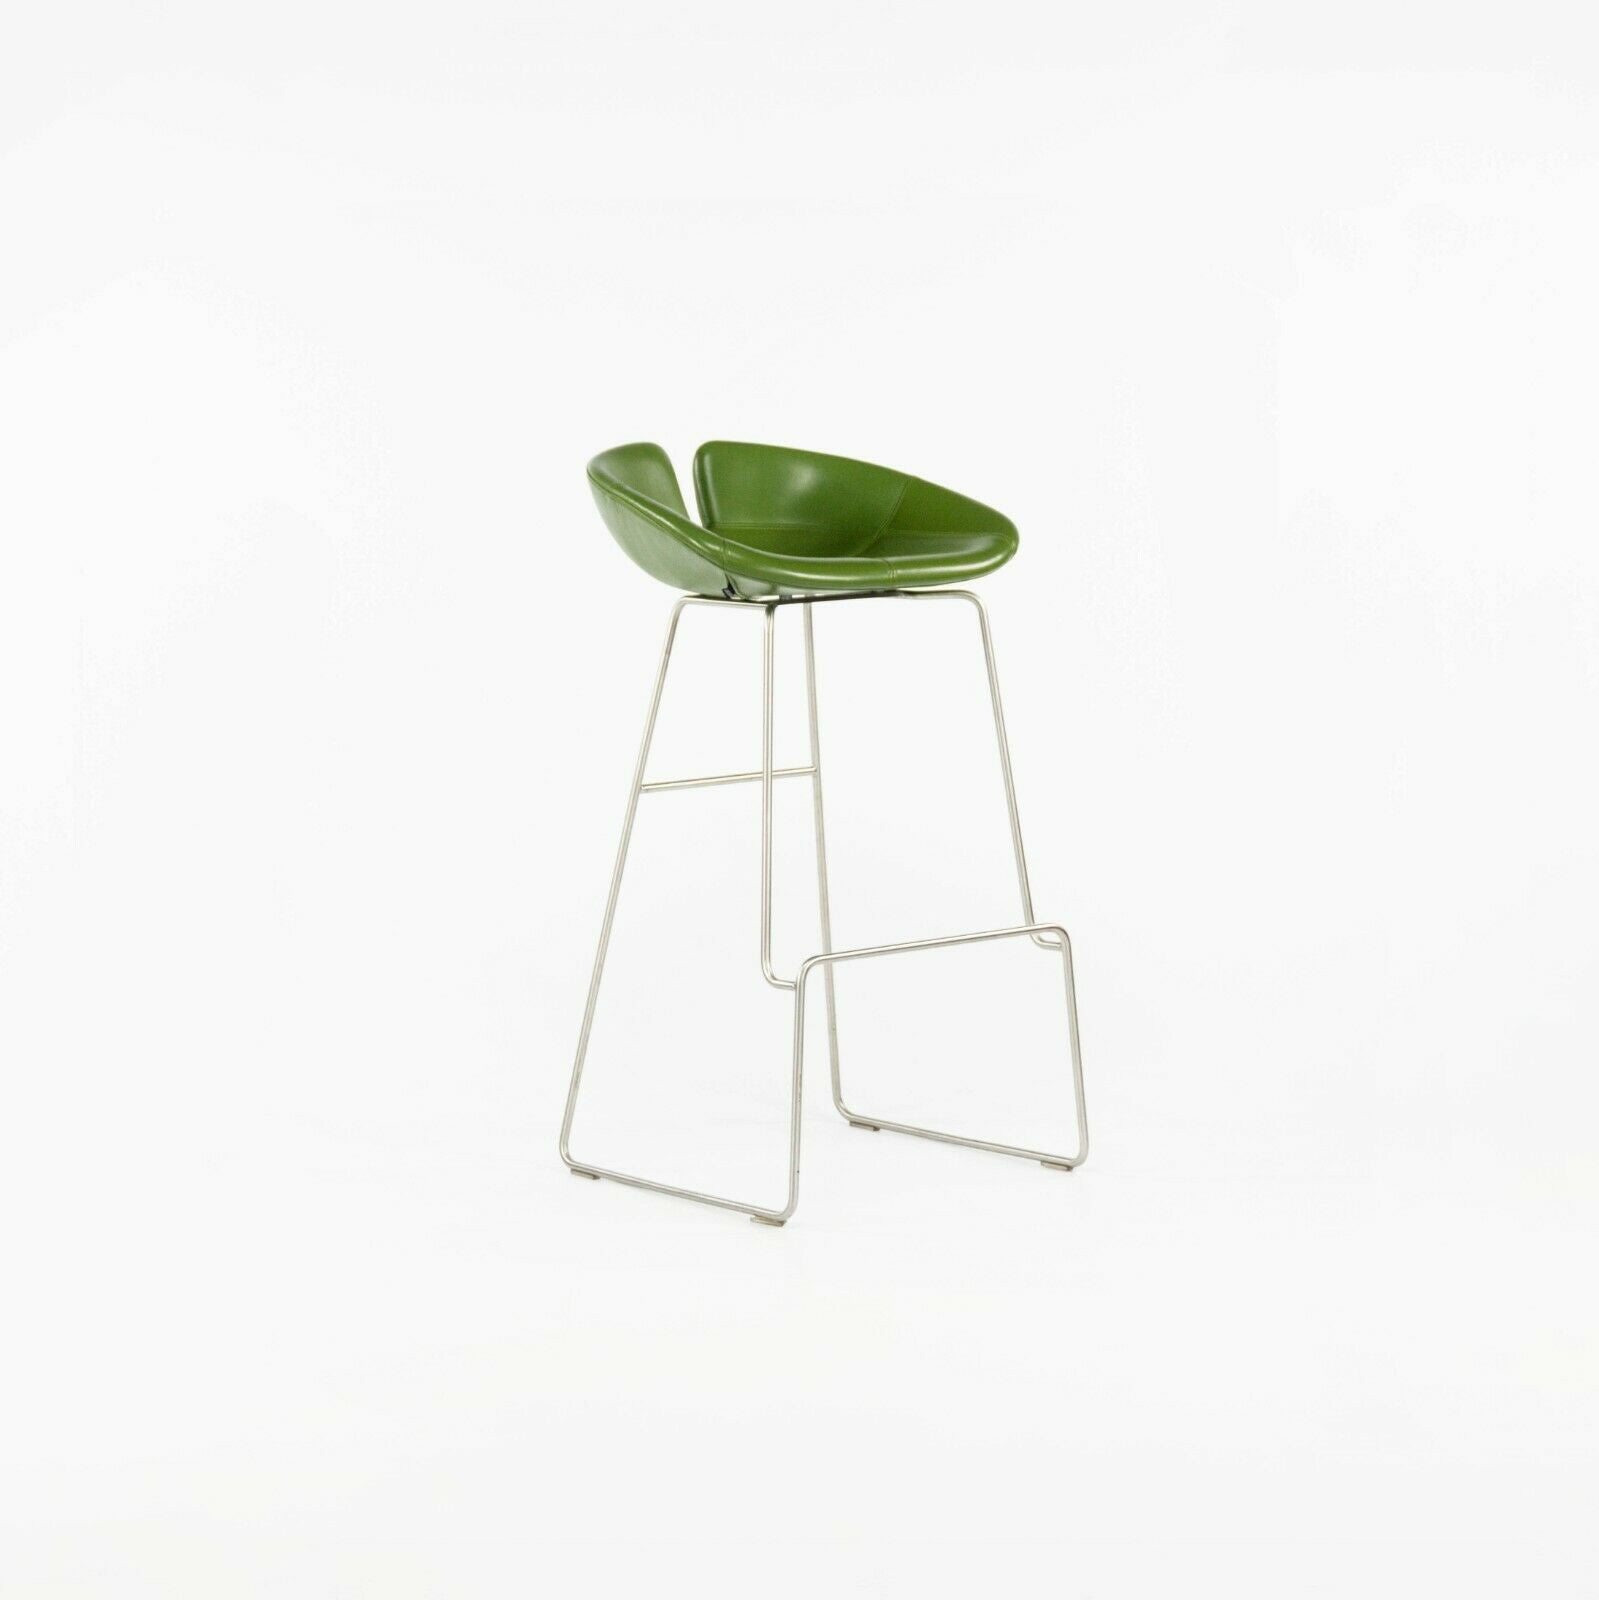 SOLD 2010 Patricia Urquiola for Moroso Fjord Bar Height High Stool in Green Leather